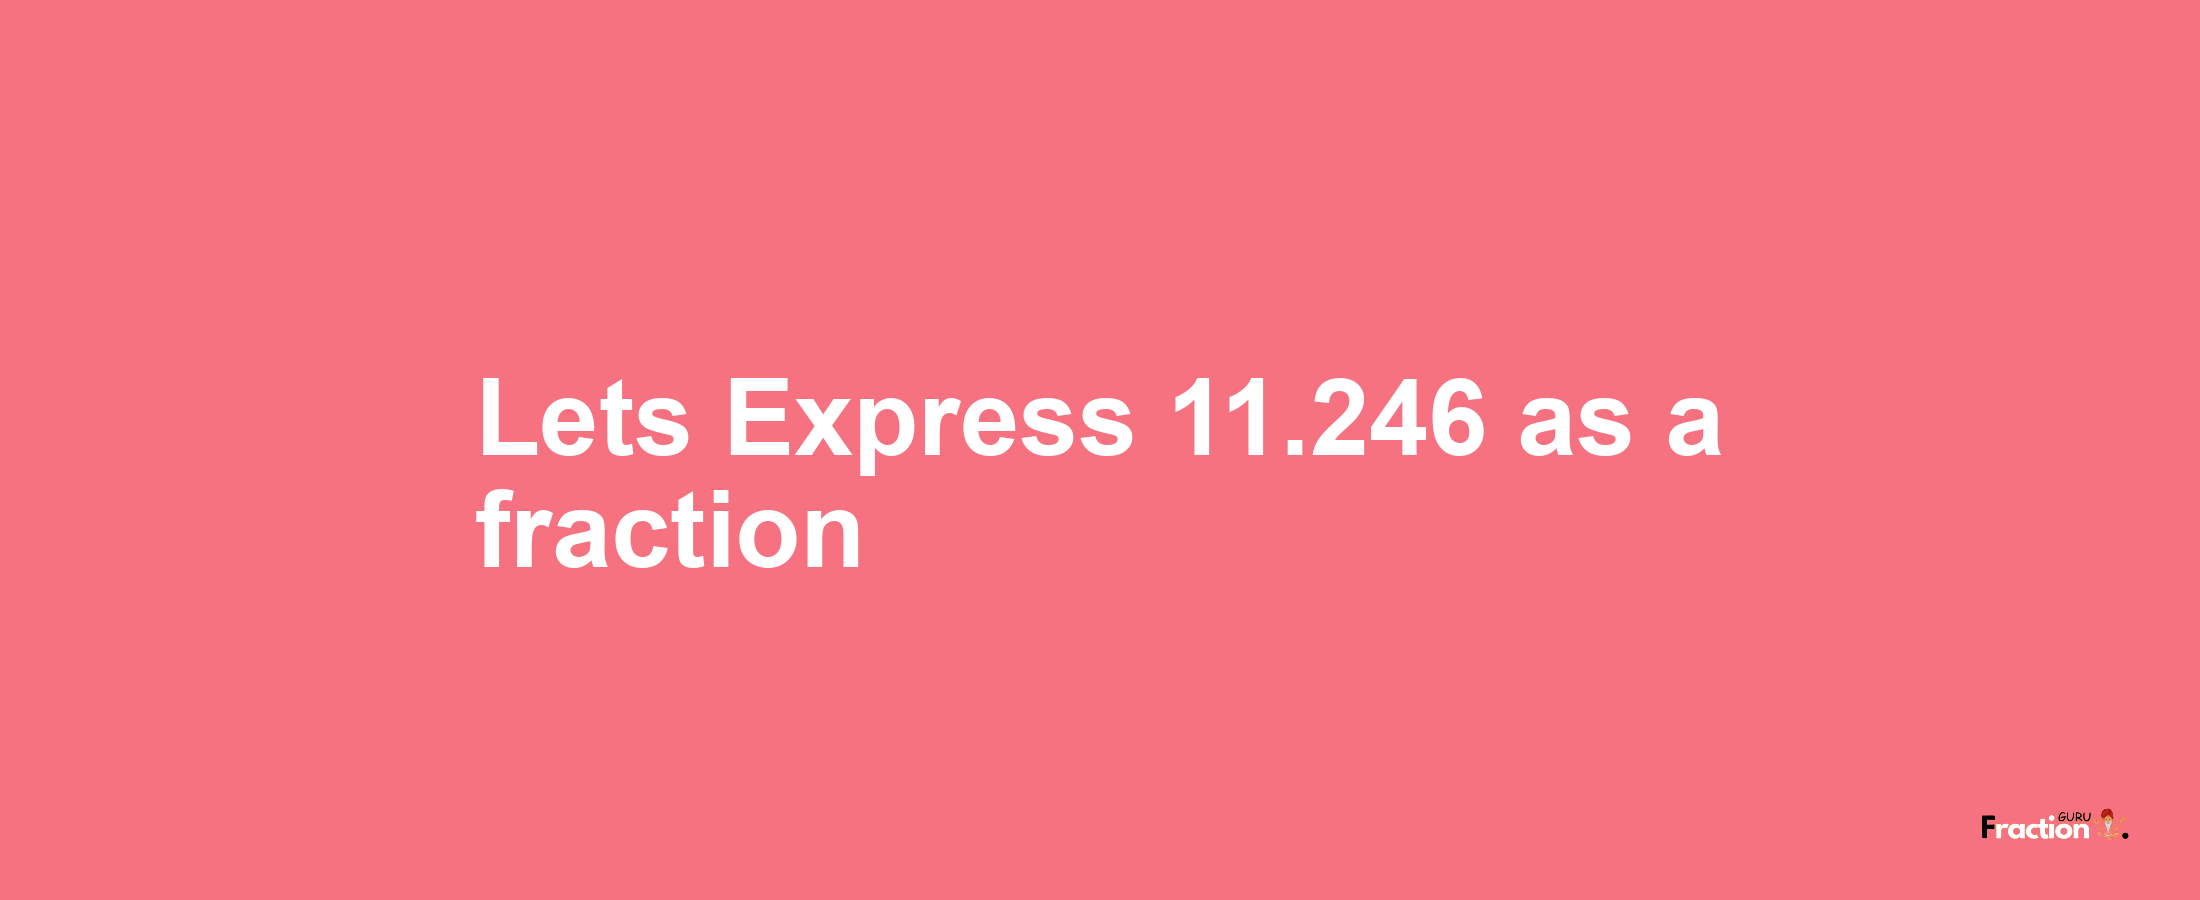 Lets Express 11.246 as afraction